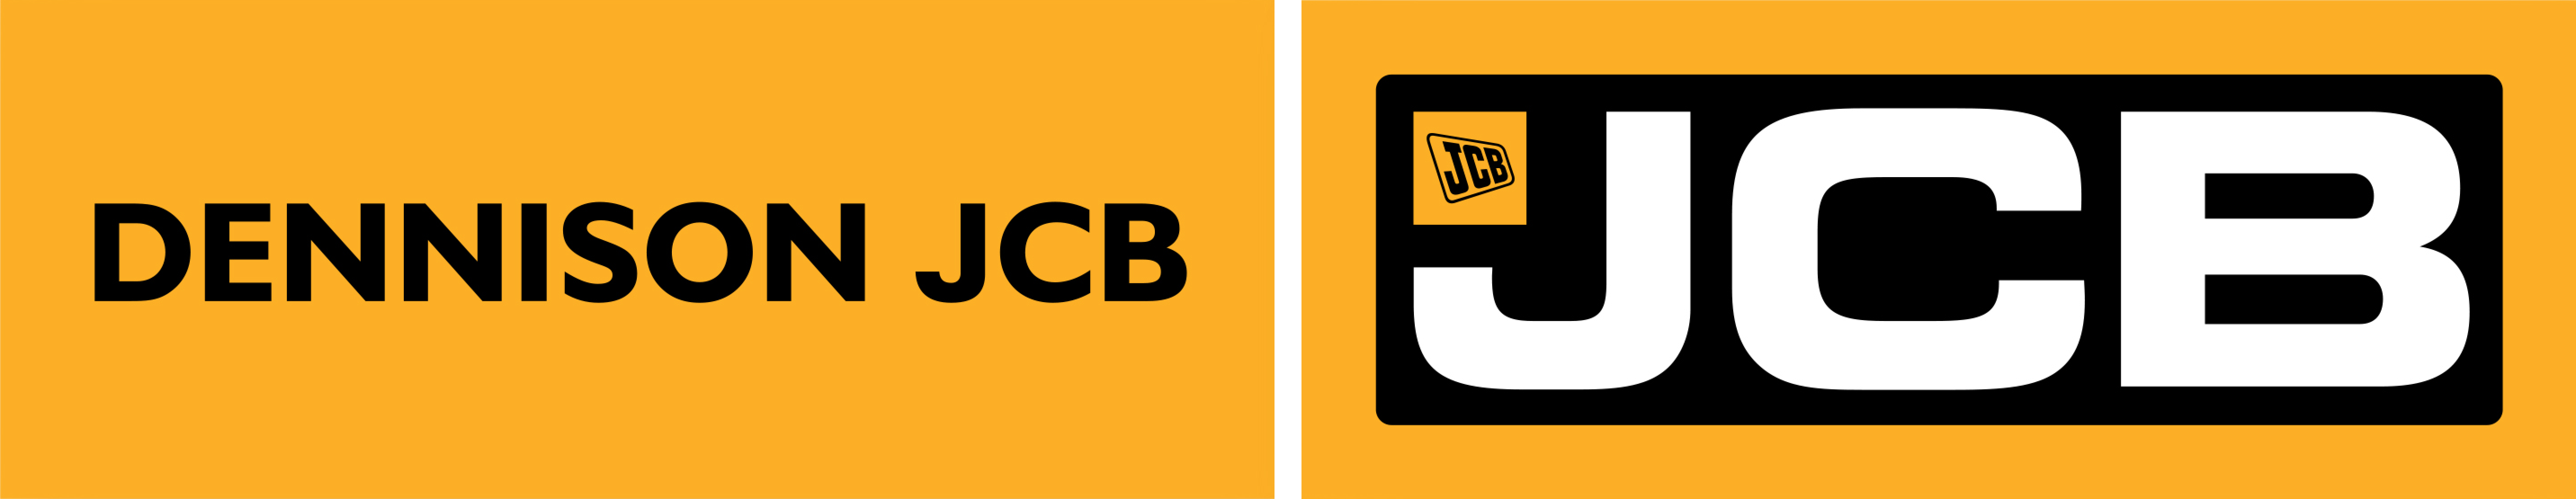 0% Interest Hire Purchase over 2 years on selected models of JCB Backhoe  Loaders